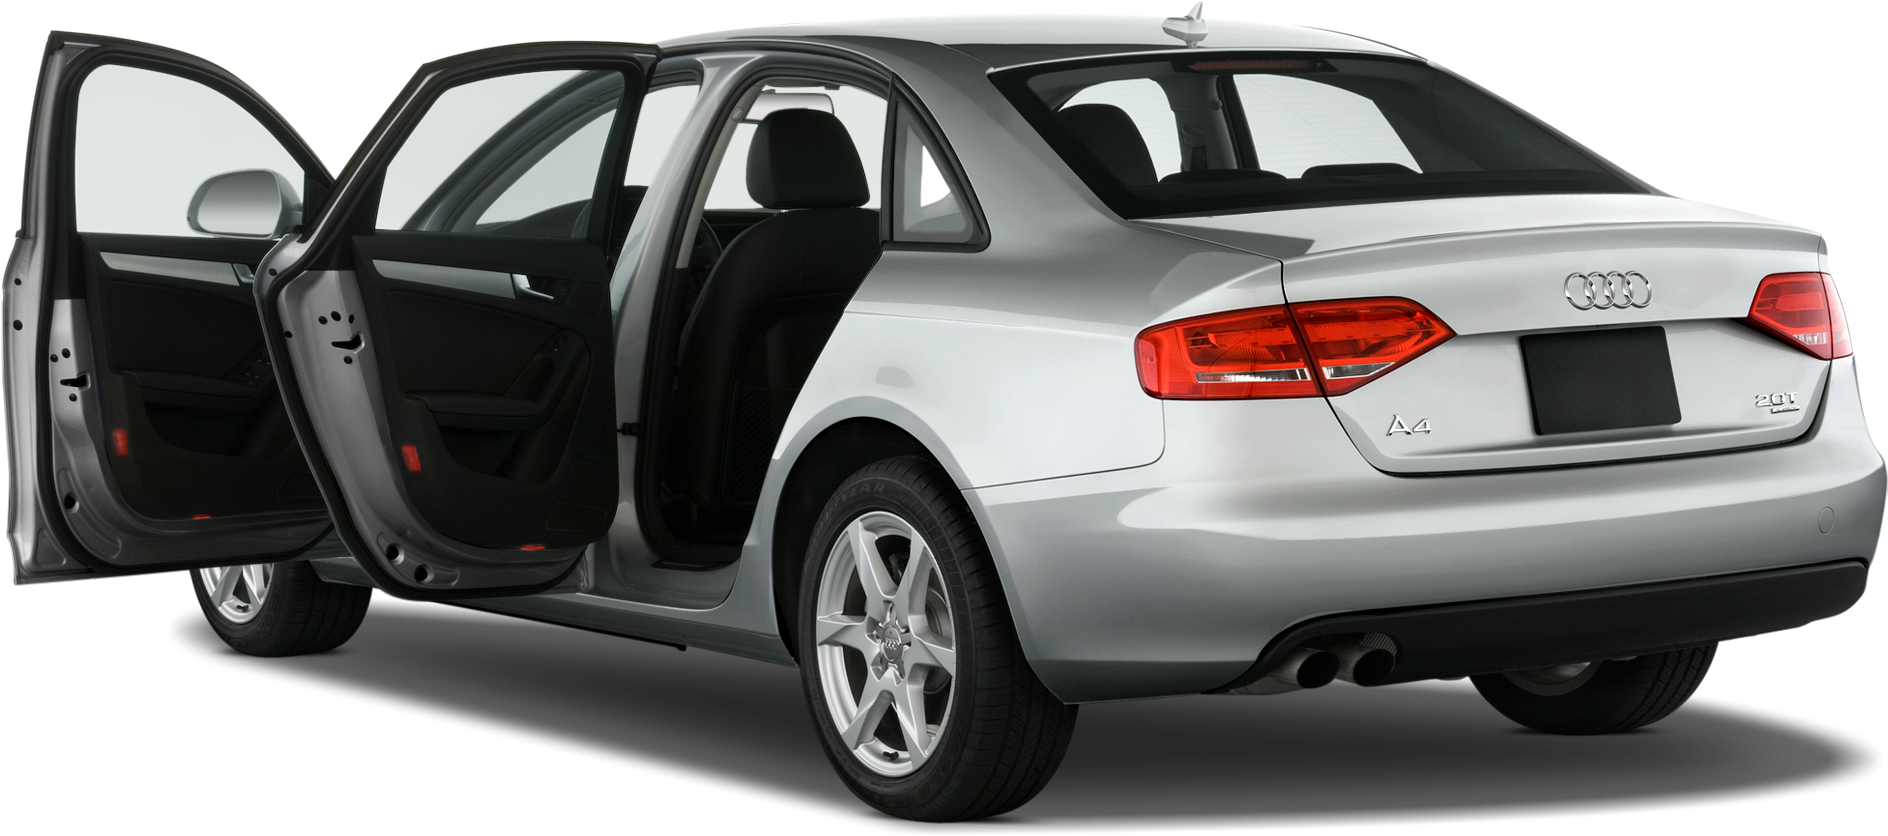 Silver Audi A4 Rear Viewwith Open Doors PNG image